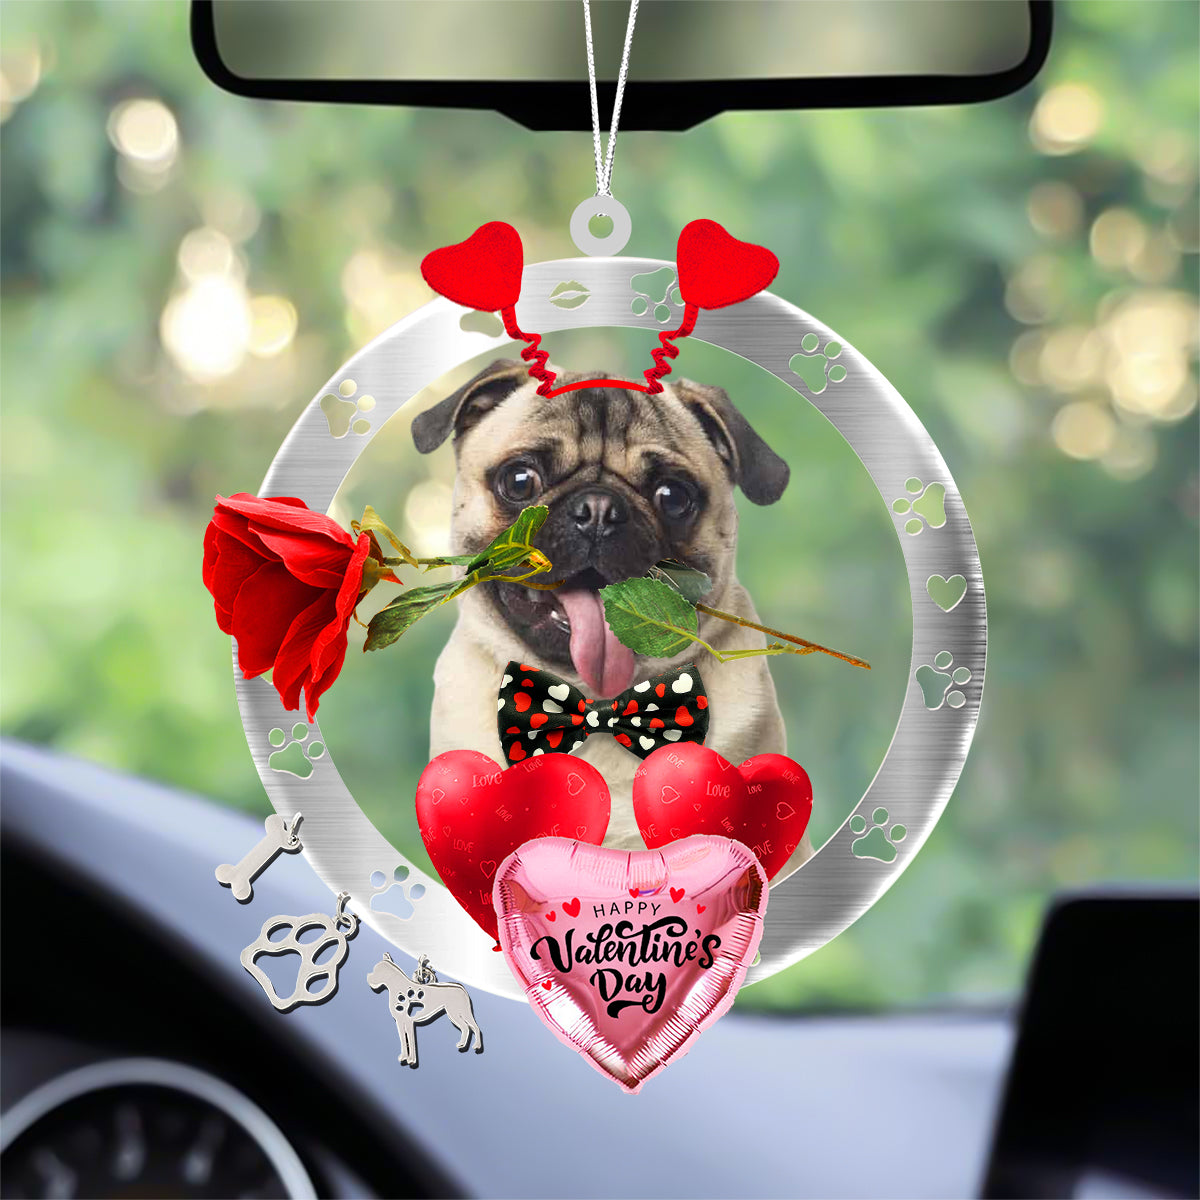 Pug With Rose & Heart Balloon Ornament